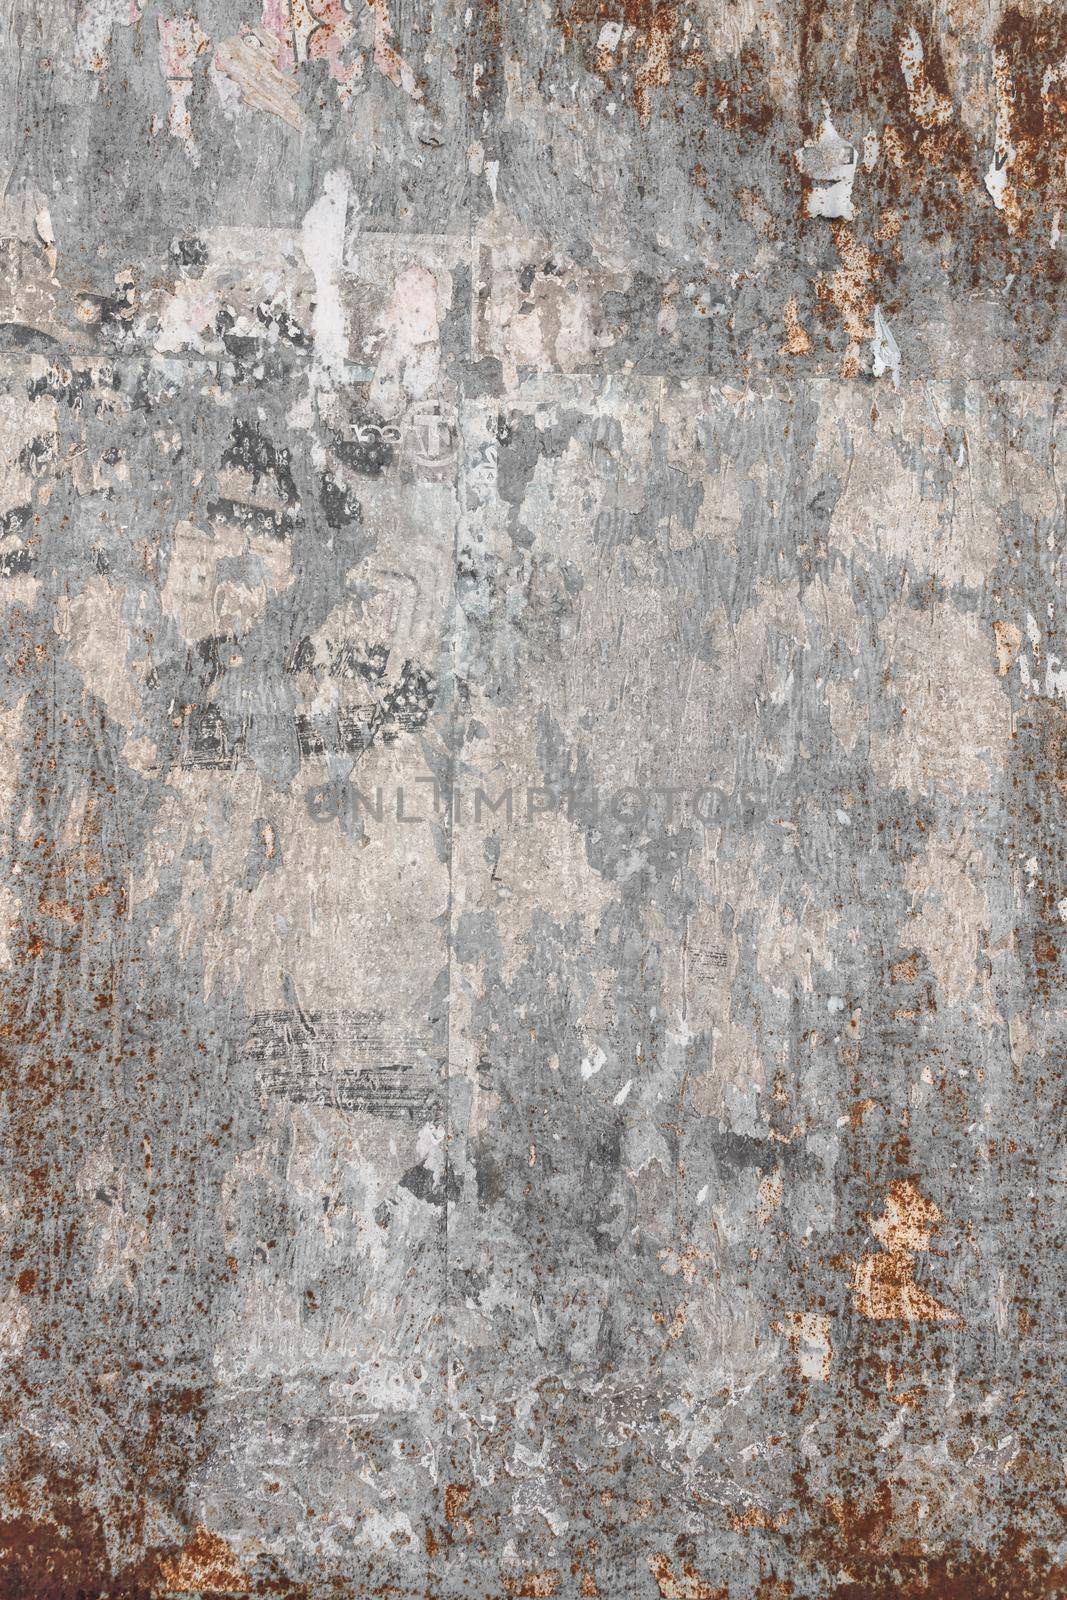 Rusty metal texture, vintage steel plate. It can be used as background.